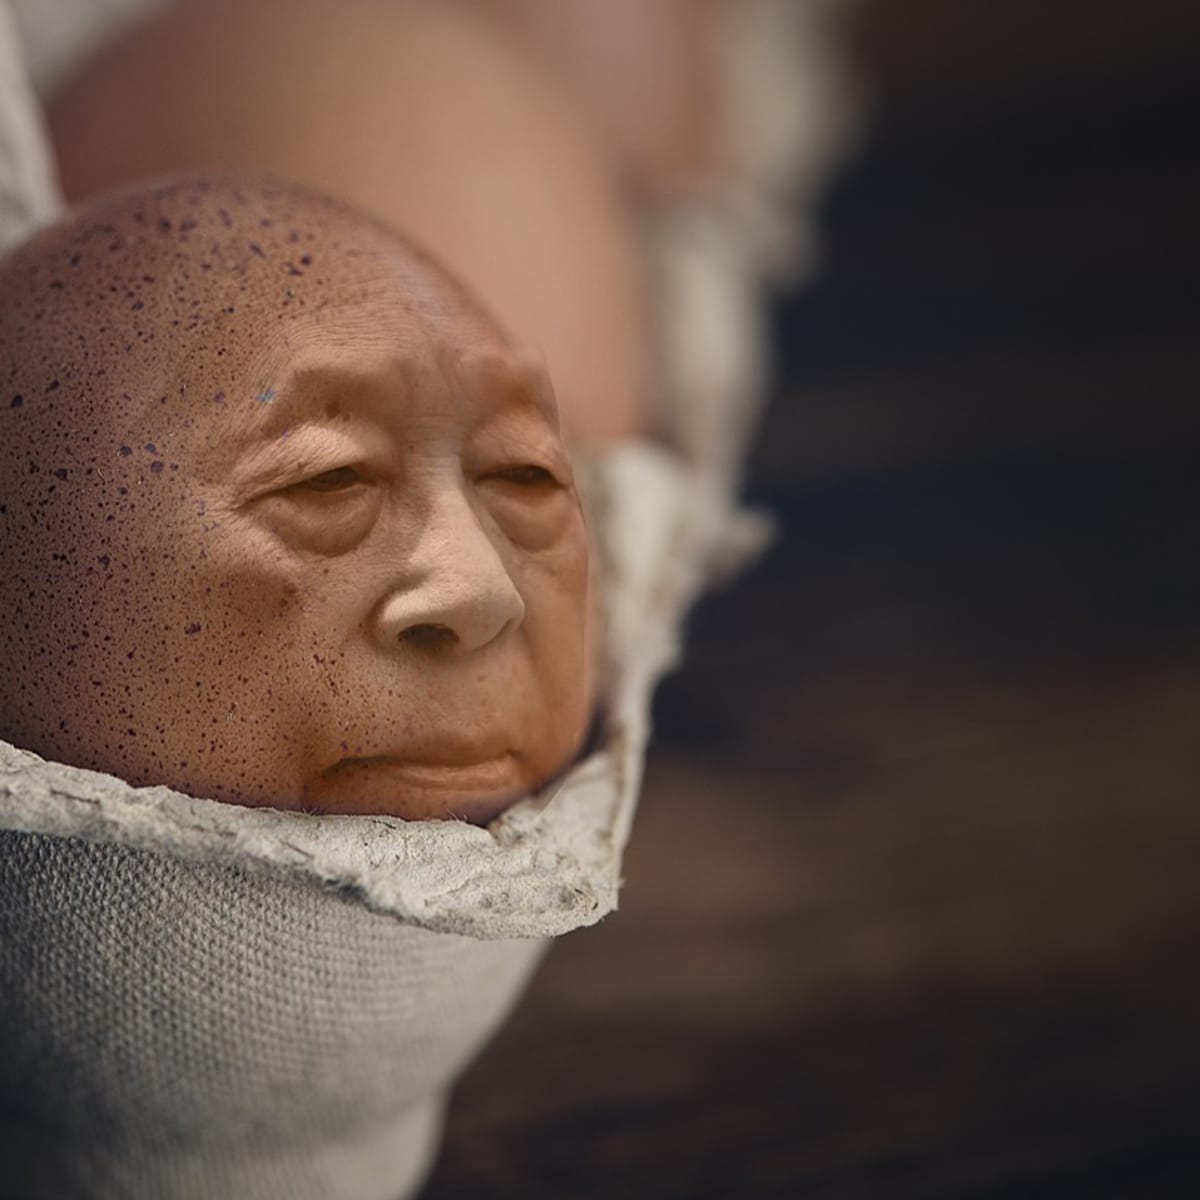 People Love to Eat This Rotten Egg